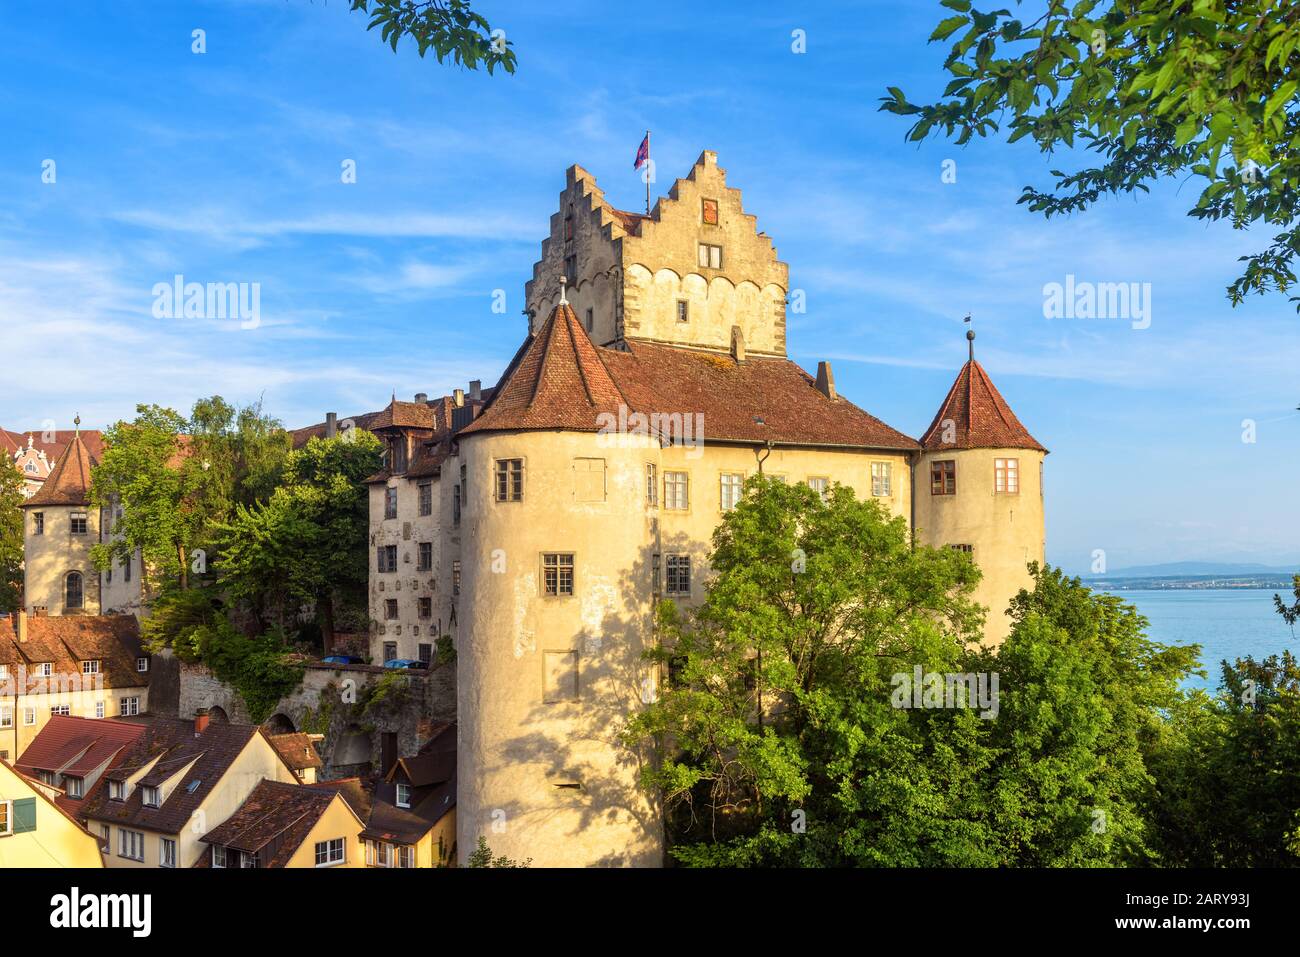 Meersburg Castle at Lake Constance or Bodensee, Germany. This old castle is landmark of Meersburg town. Scenic view of medieval German castle in summe Stock Photo